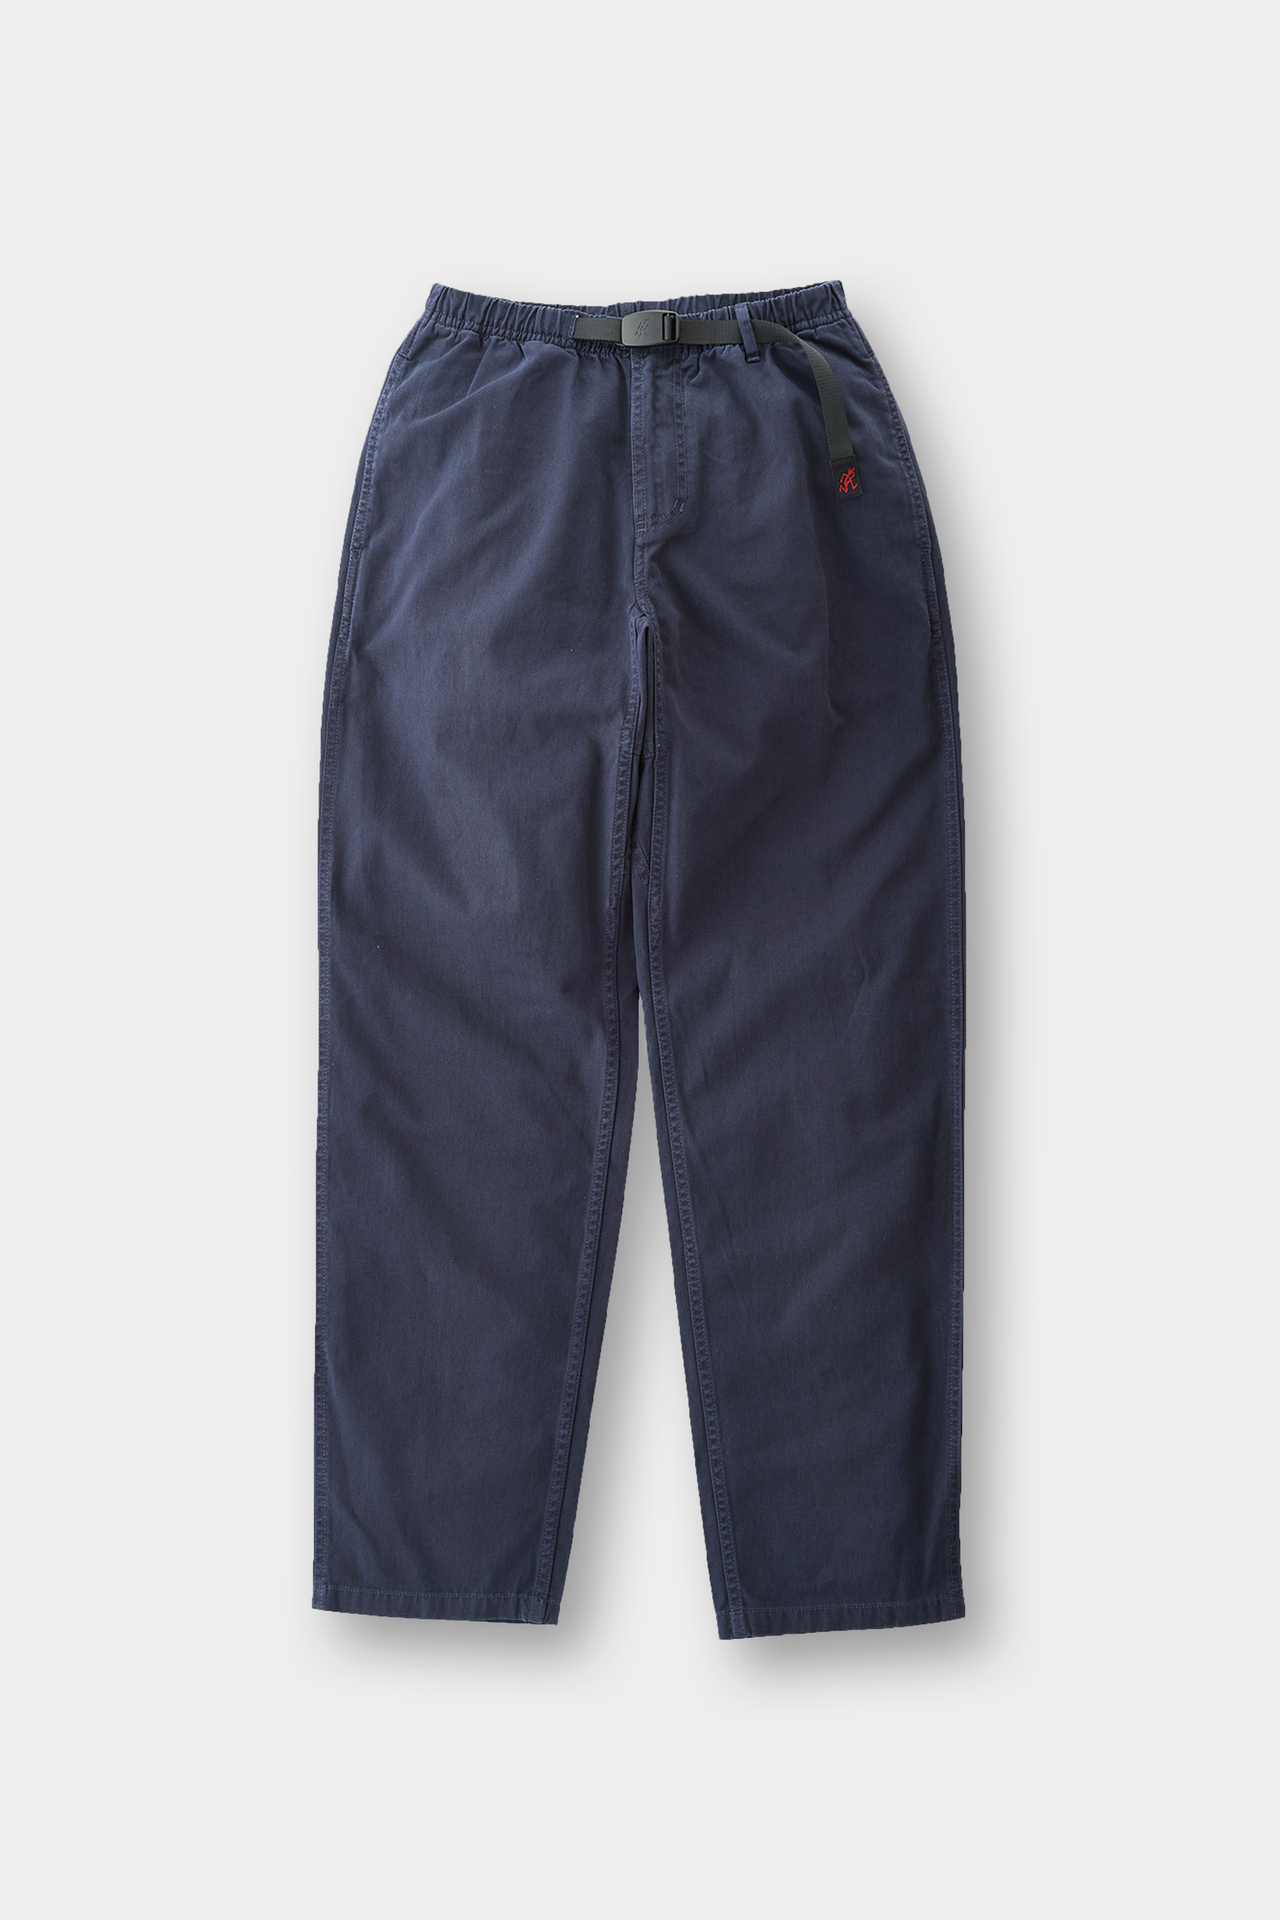 LOOSE TAPERED PANT DOUBLE NAVY